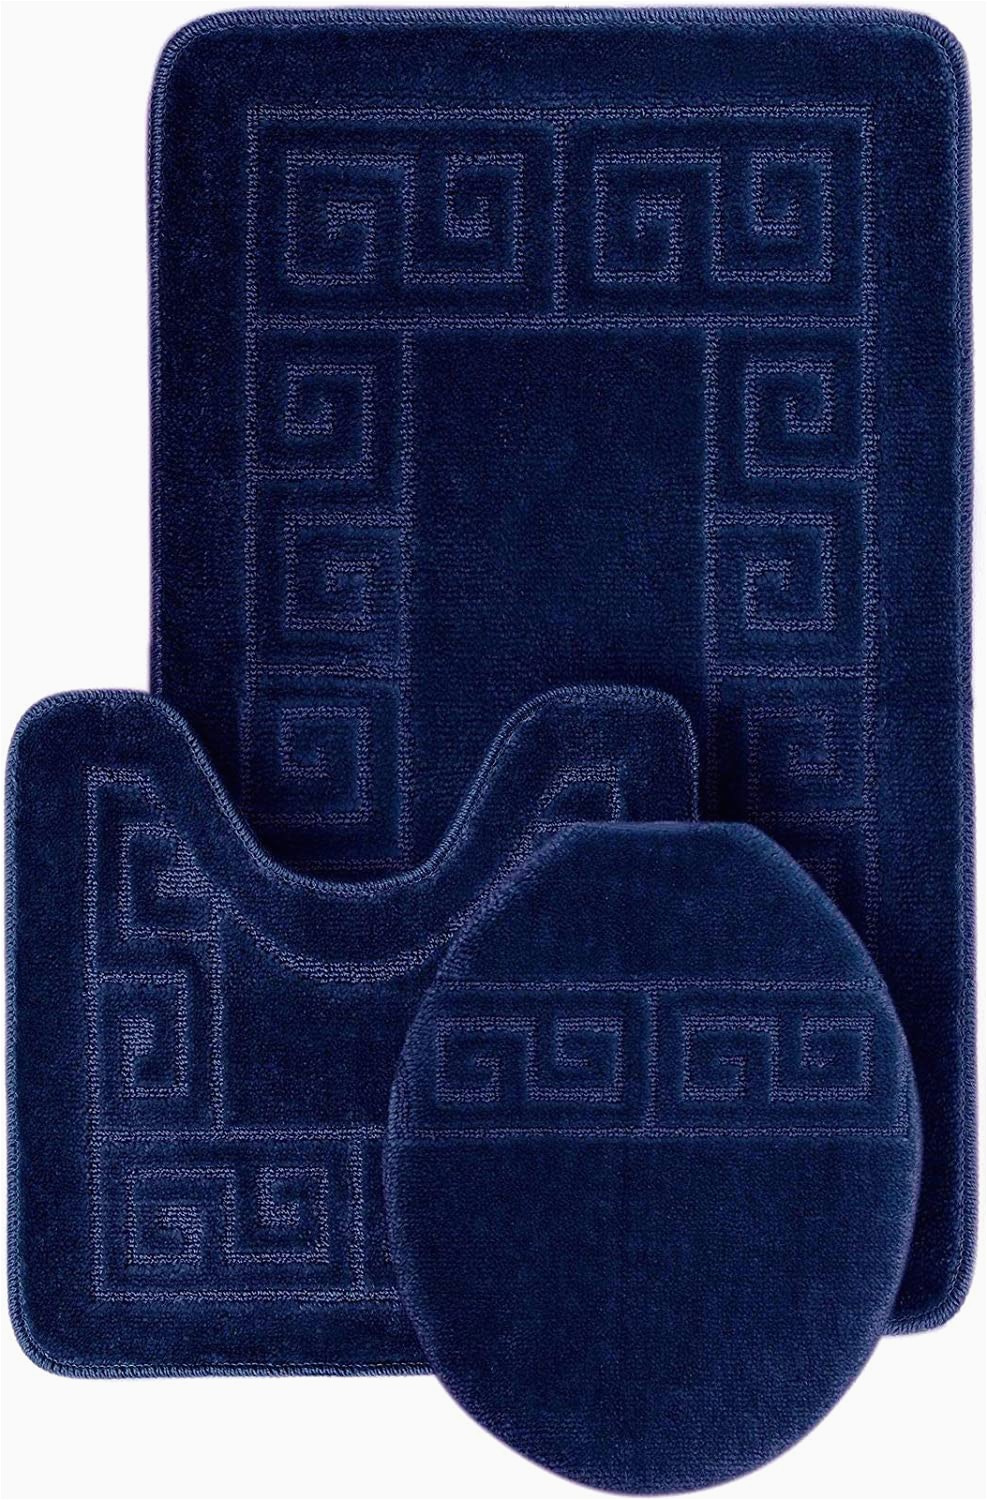 Dark Pink Bathroom Rugs Wpm World Products Mart Bathroom Rugs Set 3 Piece Bath Pattern Rug 20"x32" Contour Mats 20"x20" with Lid Cover Navy